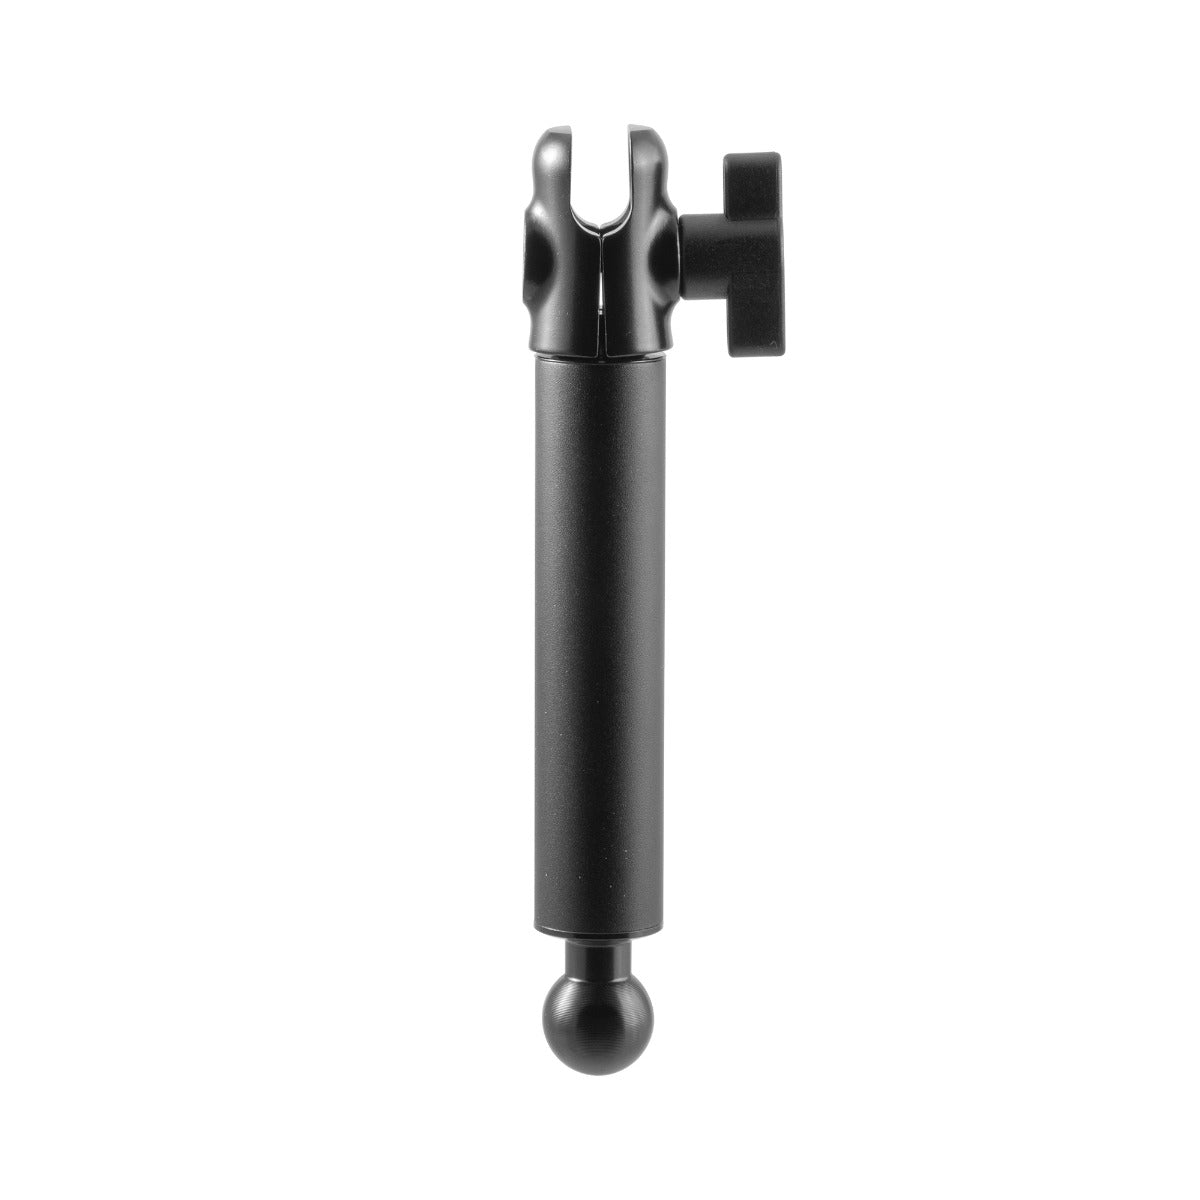 iBOLT™ FixedPro 360 6.5 inch Aluminum Extension arm